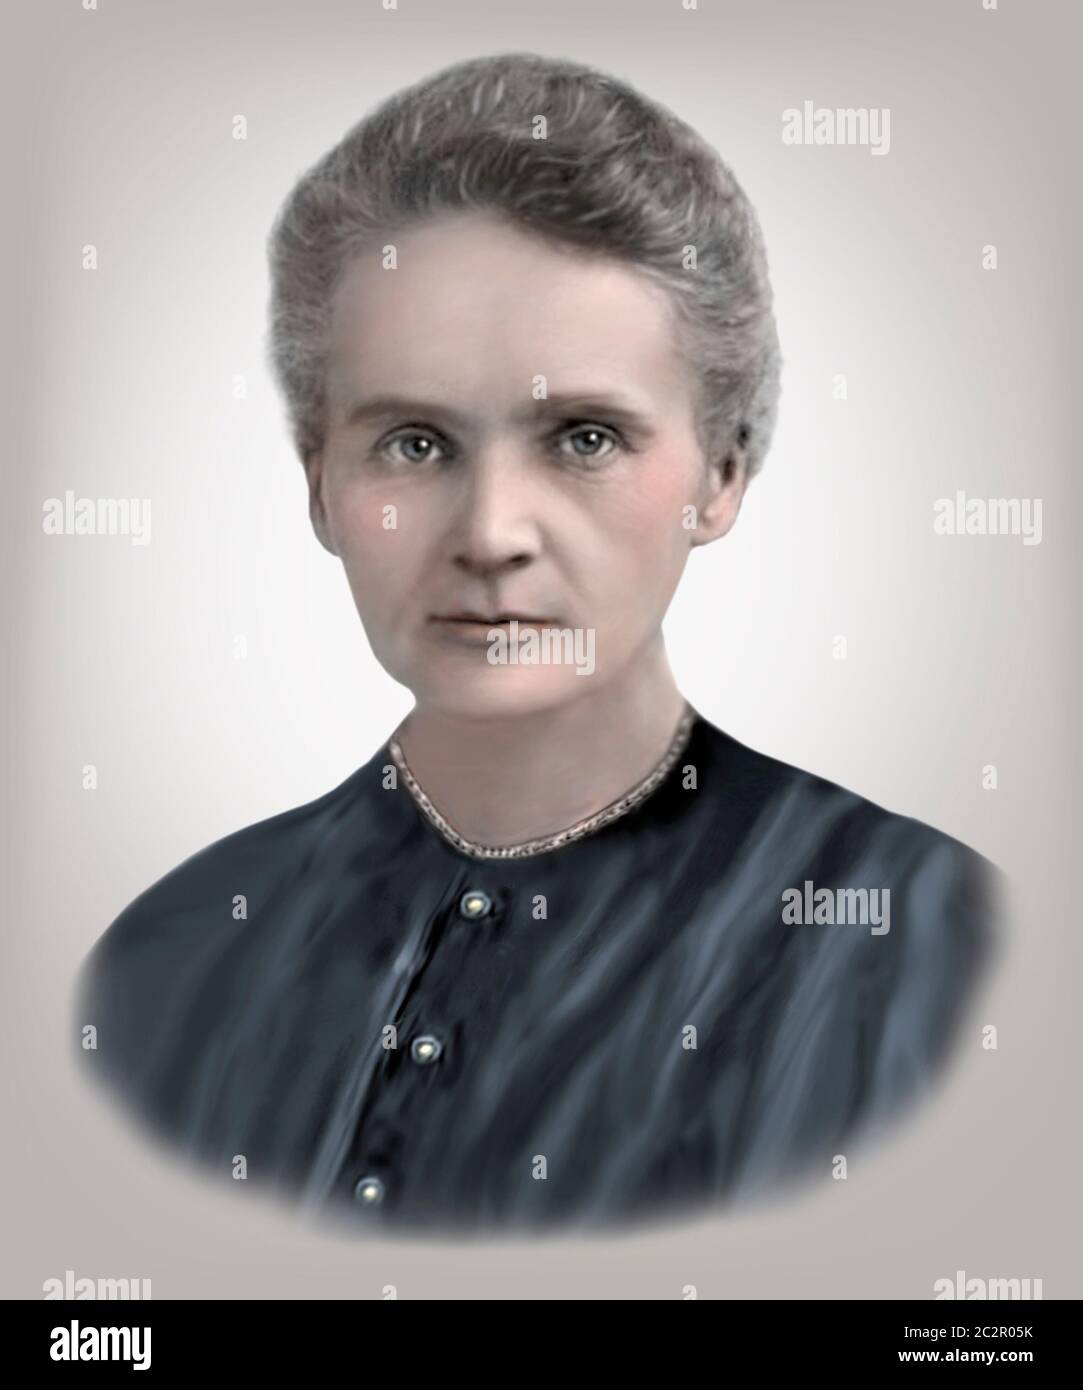 Marie Curie 1867-1934 chimico fisico francese polacco Foto Stock